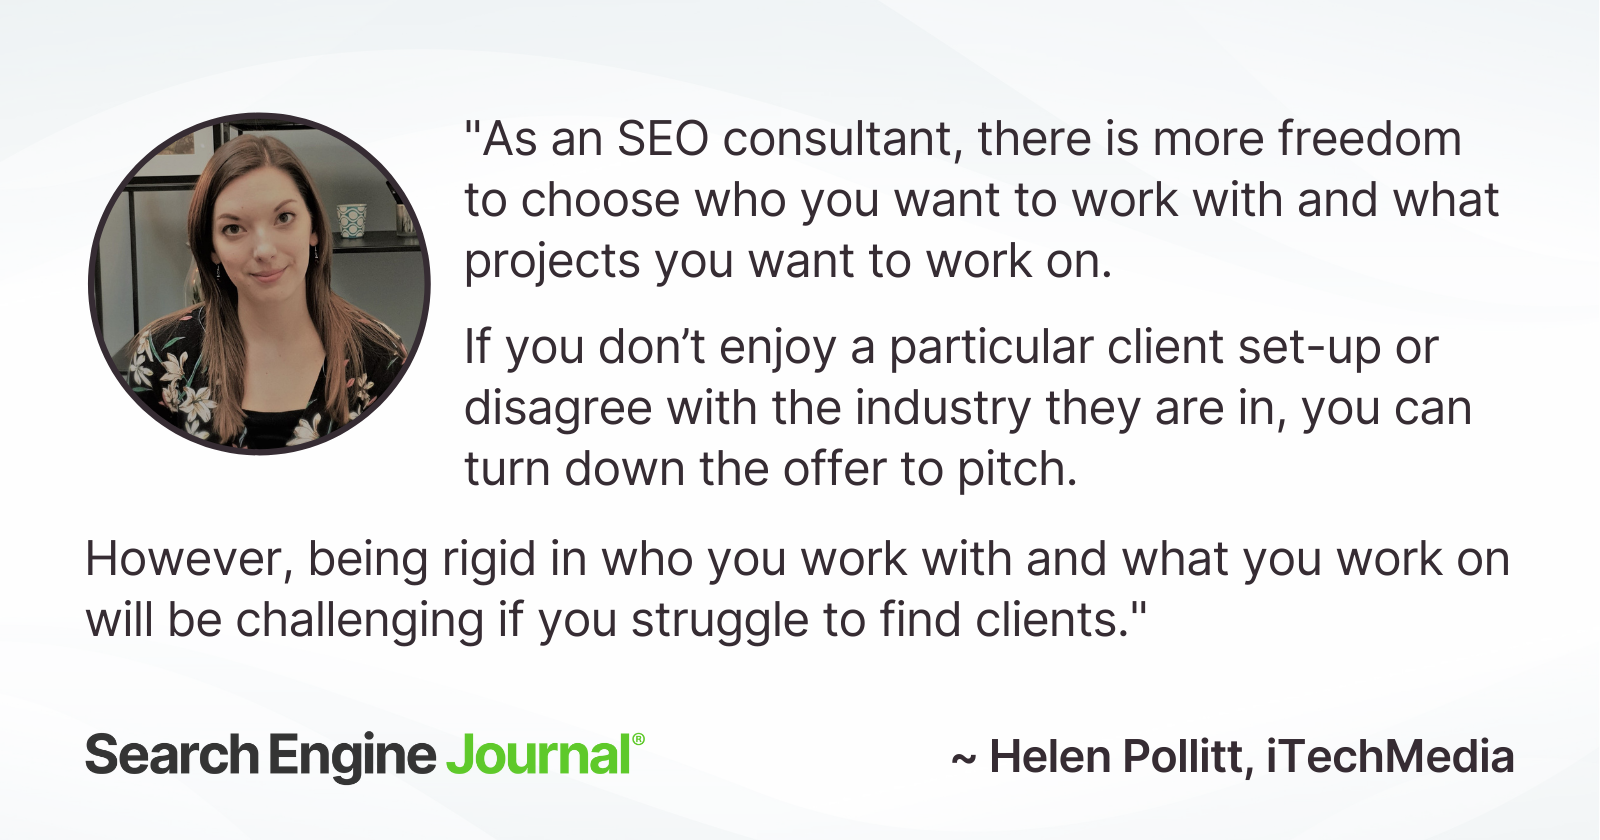 Helen Pollitt on the freedom and drawbacks of being an independent SEO consultant.